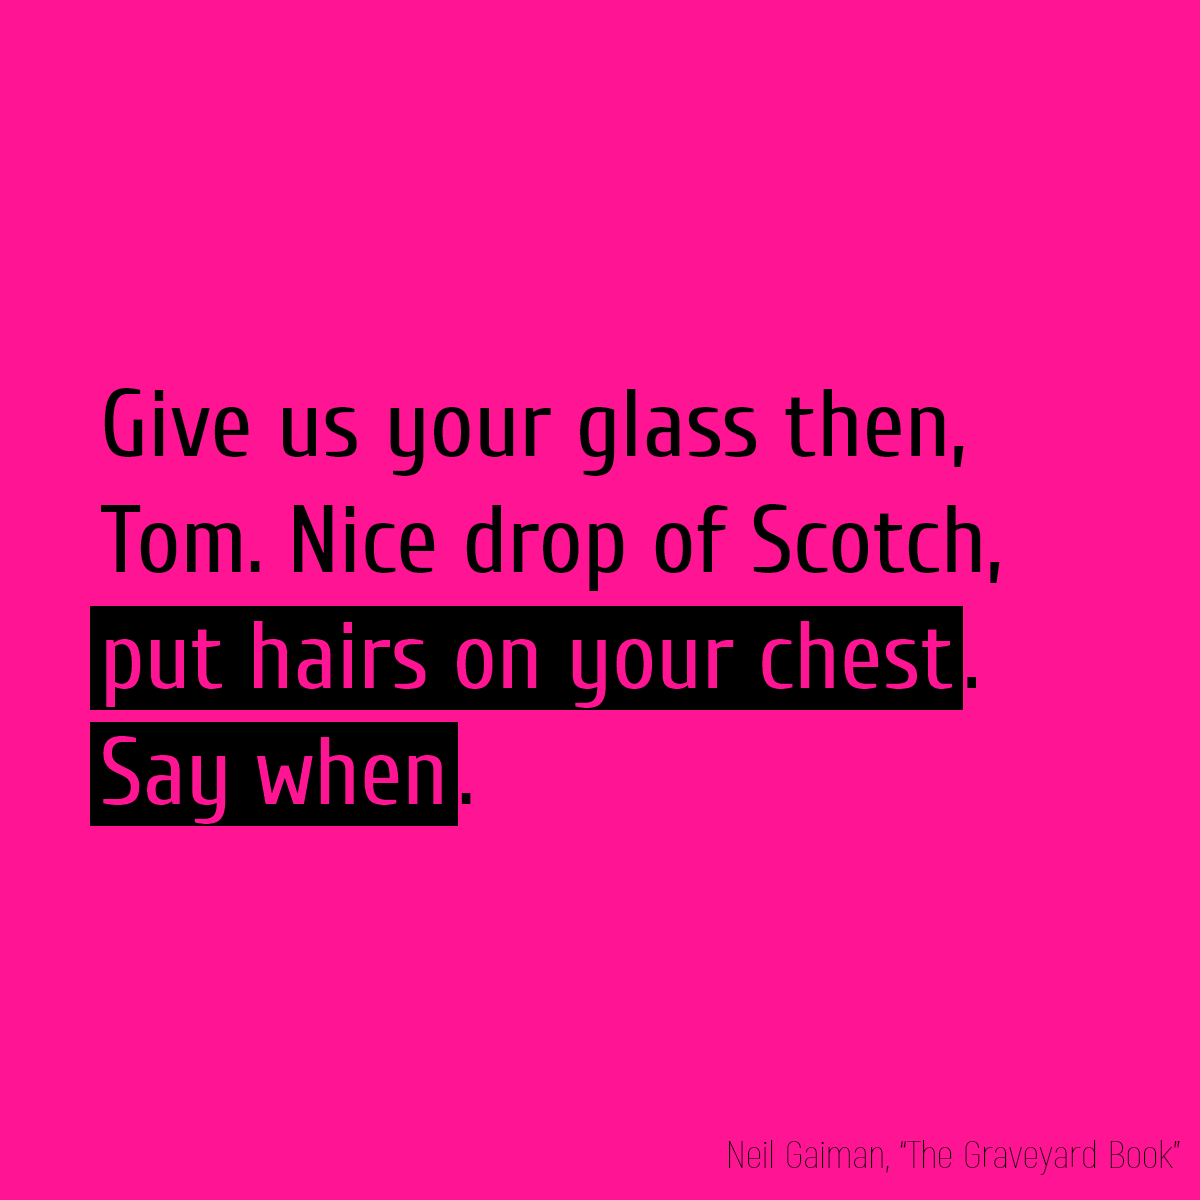 Give us your glass then, Tom. Nice drop of Scotch, **put hairs on your chest**. **Say when**.